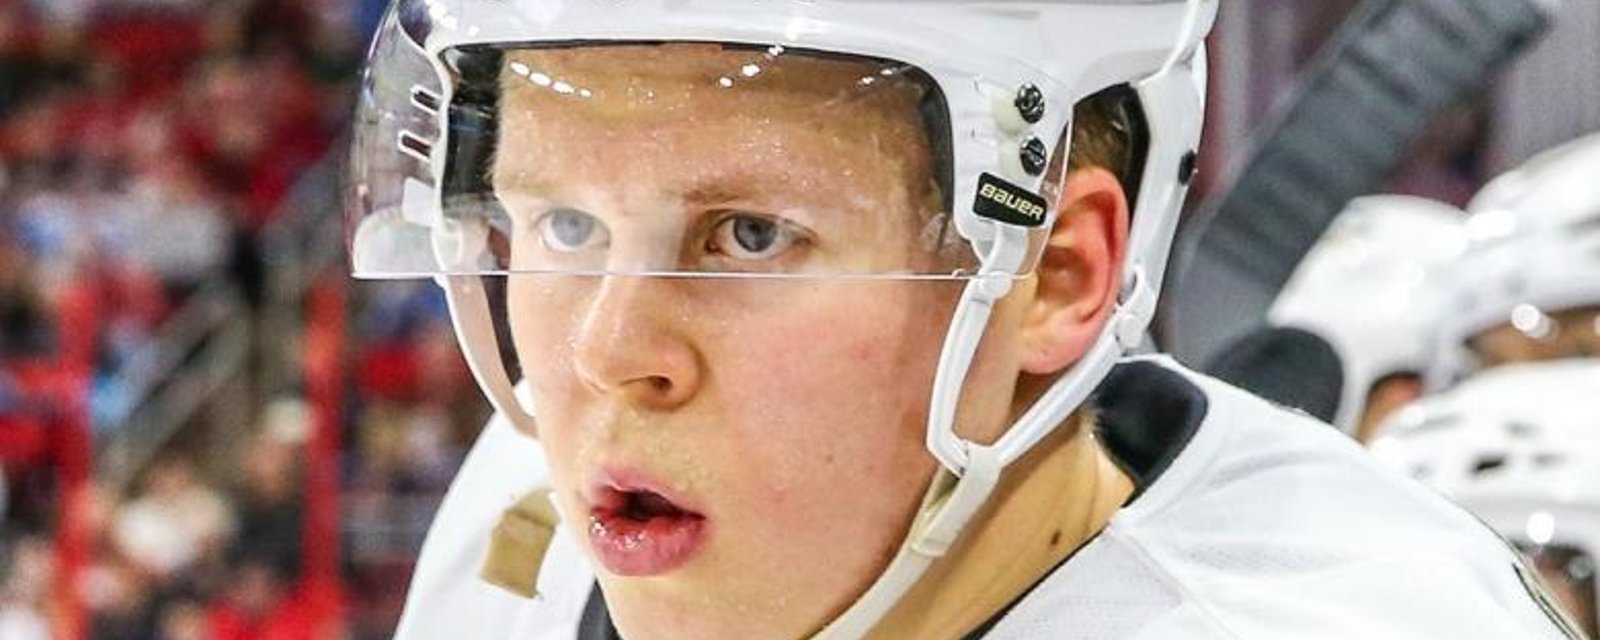 Report: Young NHL defenseman must report for military service.